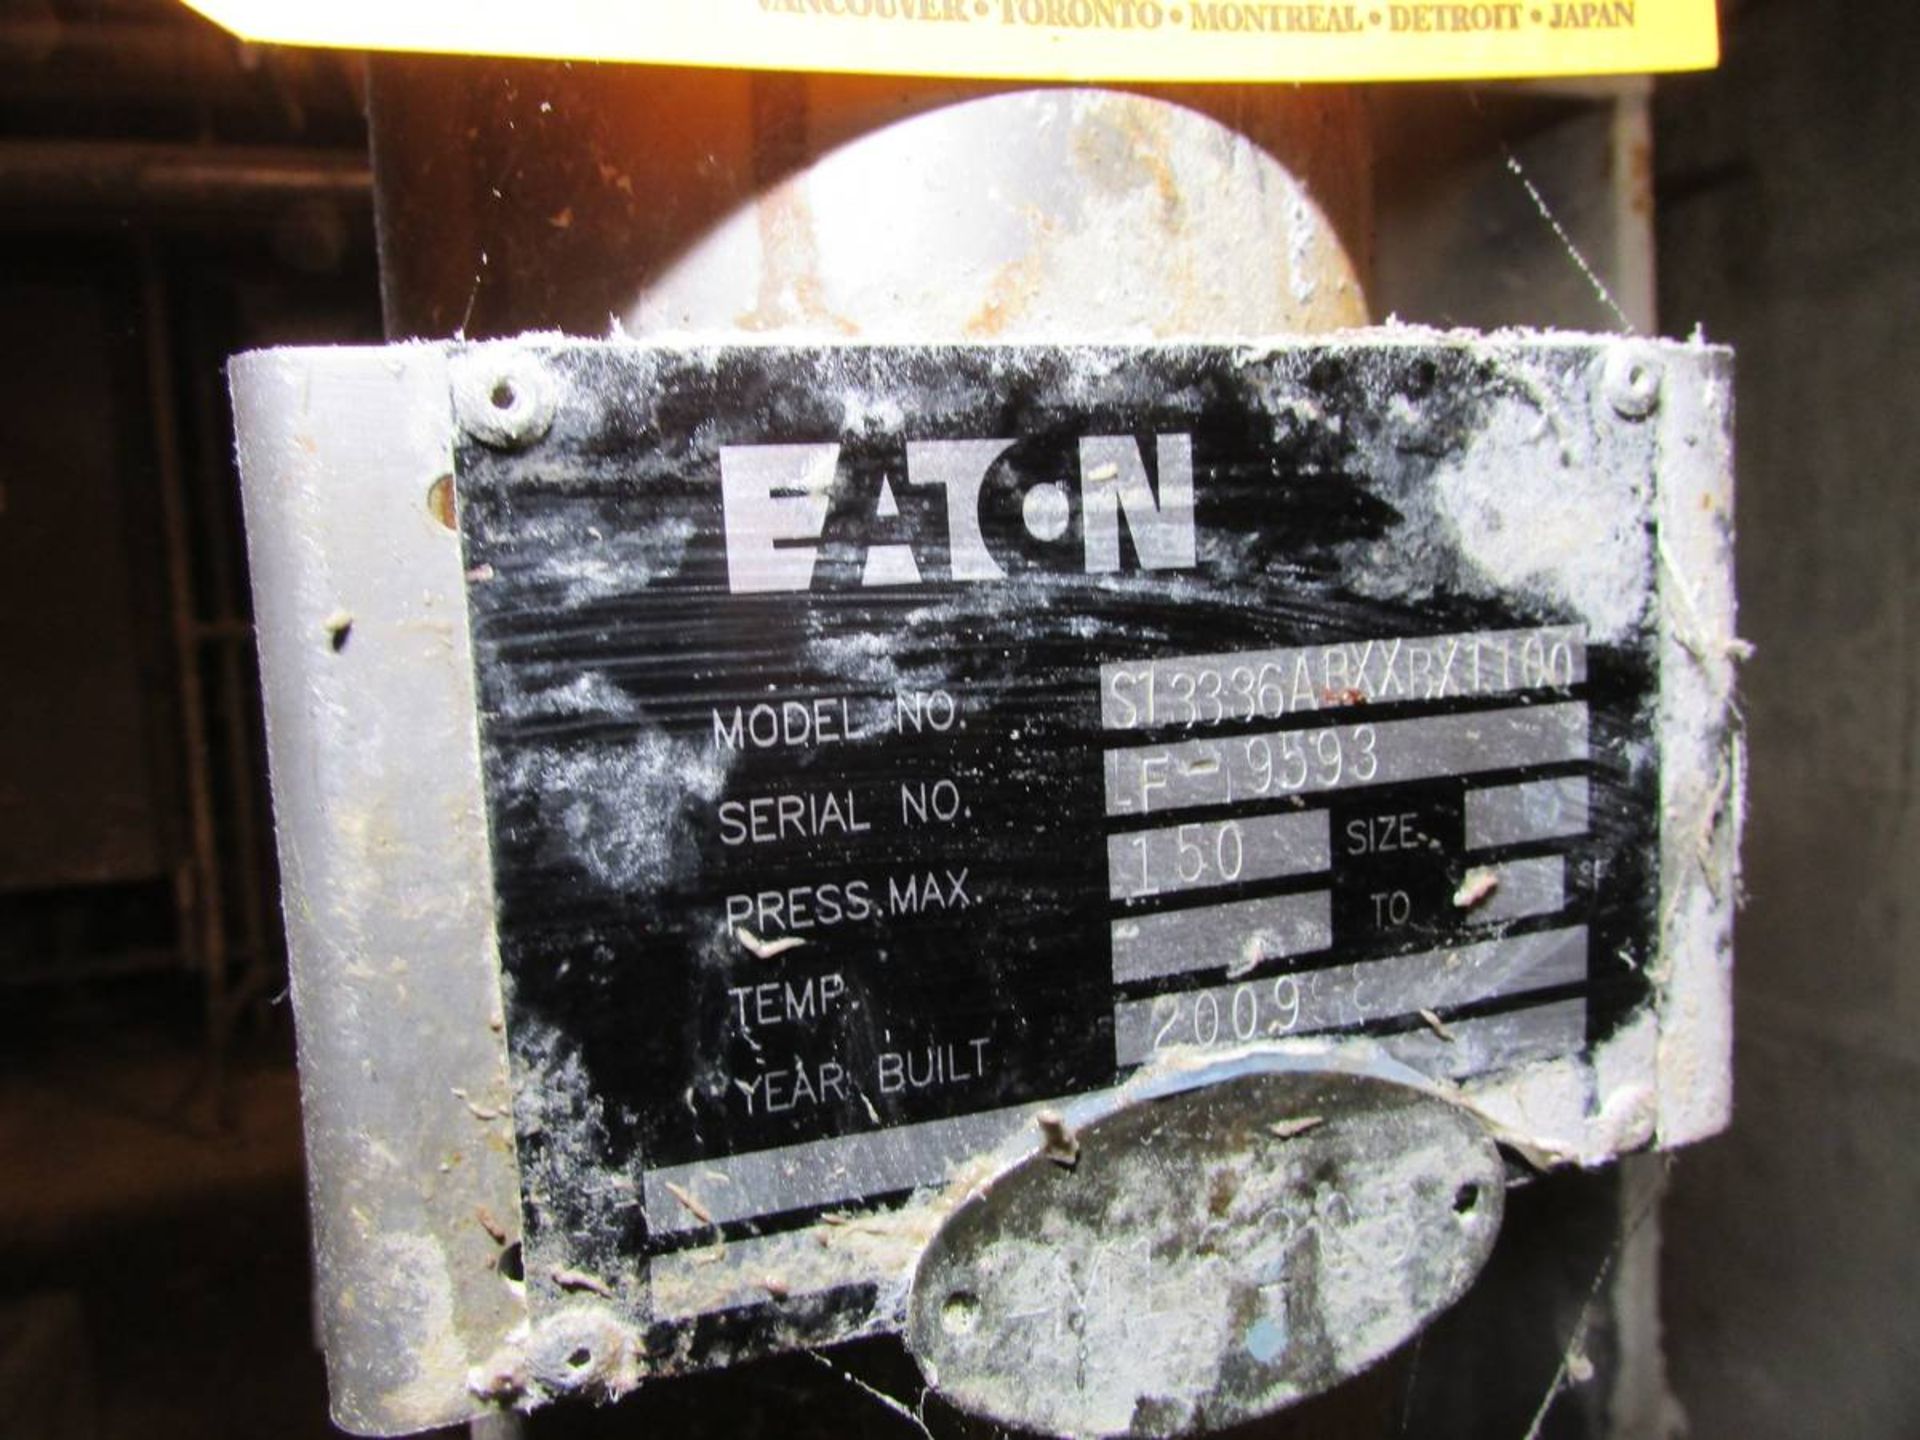 Eaton S13336ABXXBX1100 S/S Filter Housing - Image 2 of 2